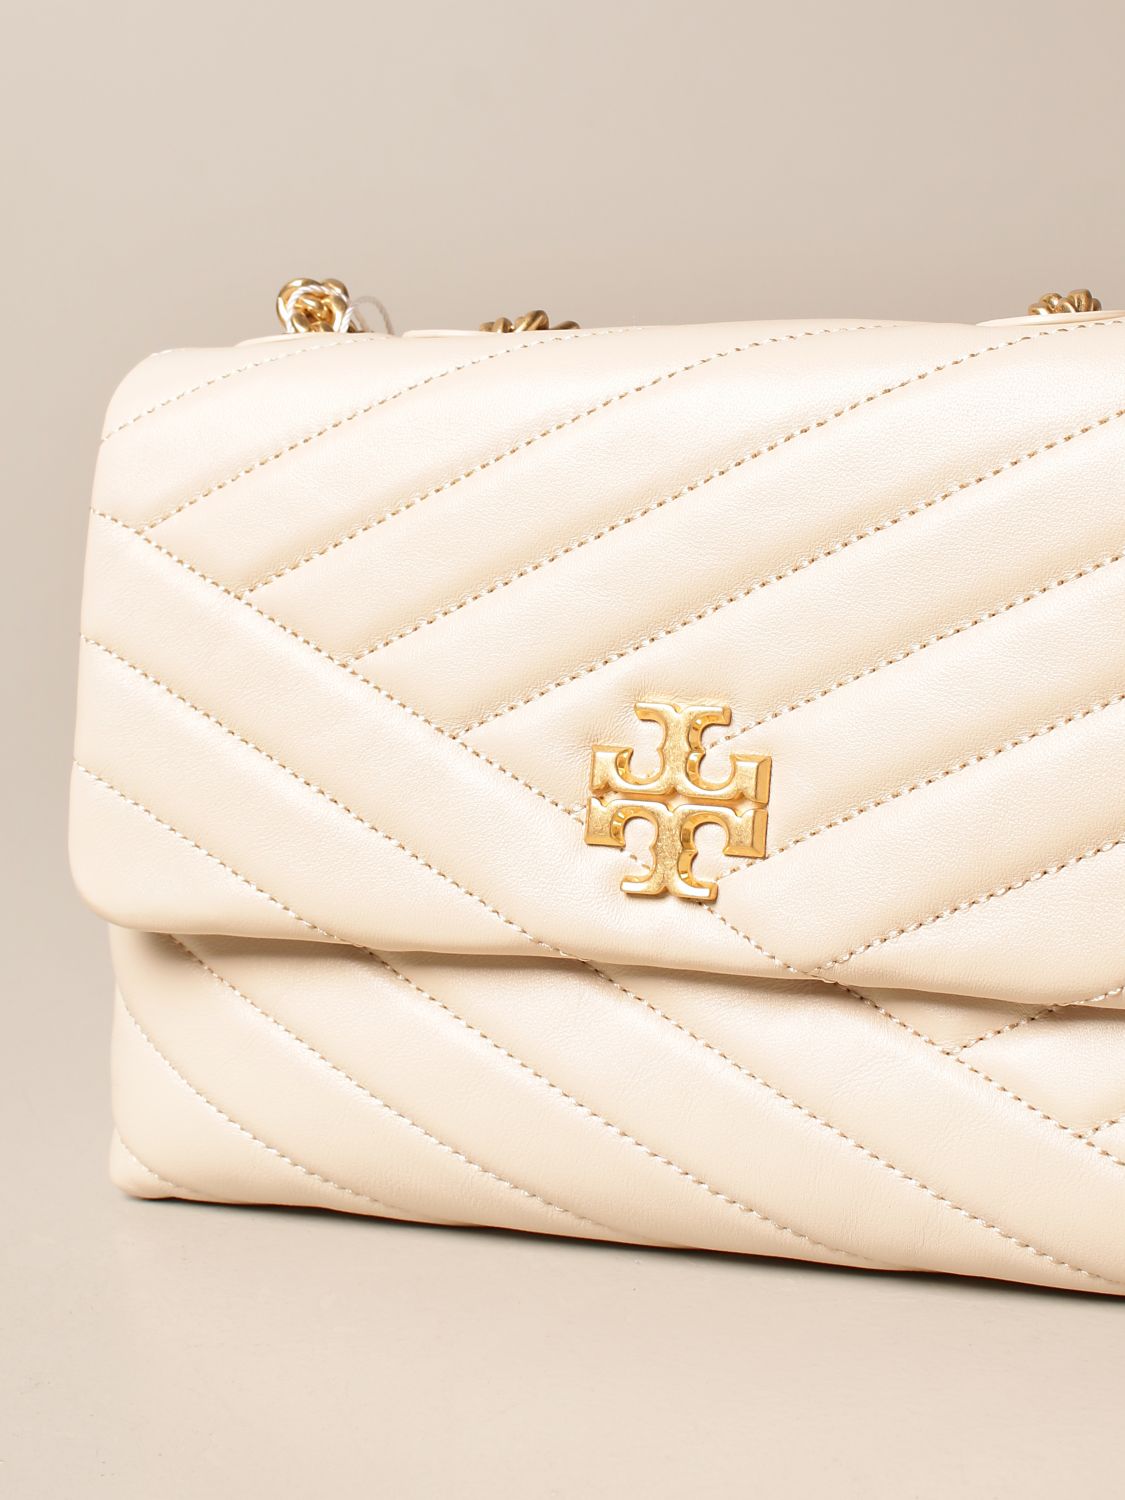 TORY BURCH: Kira bag in quilted leather - Cream | Tory Burch crossbody bags  64963 online on 